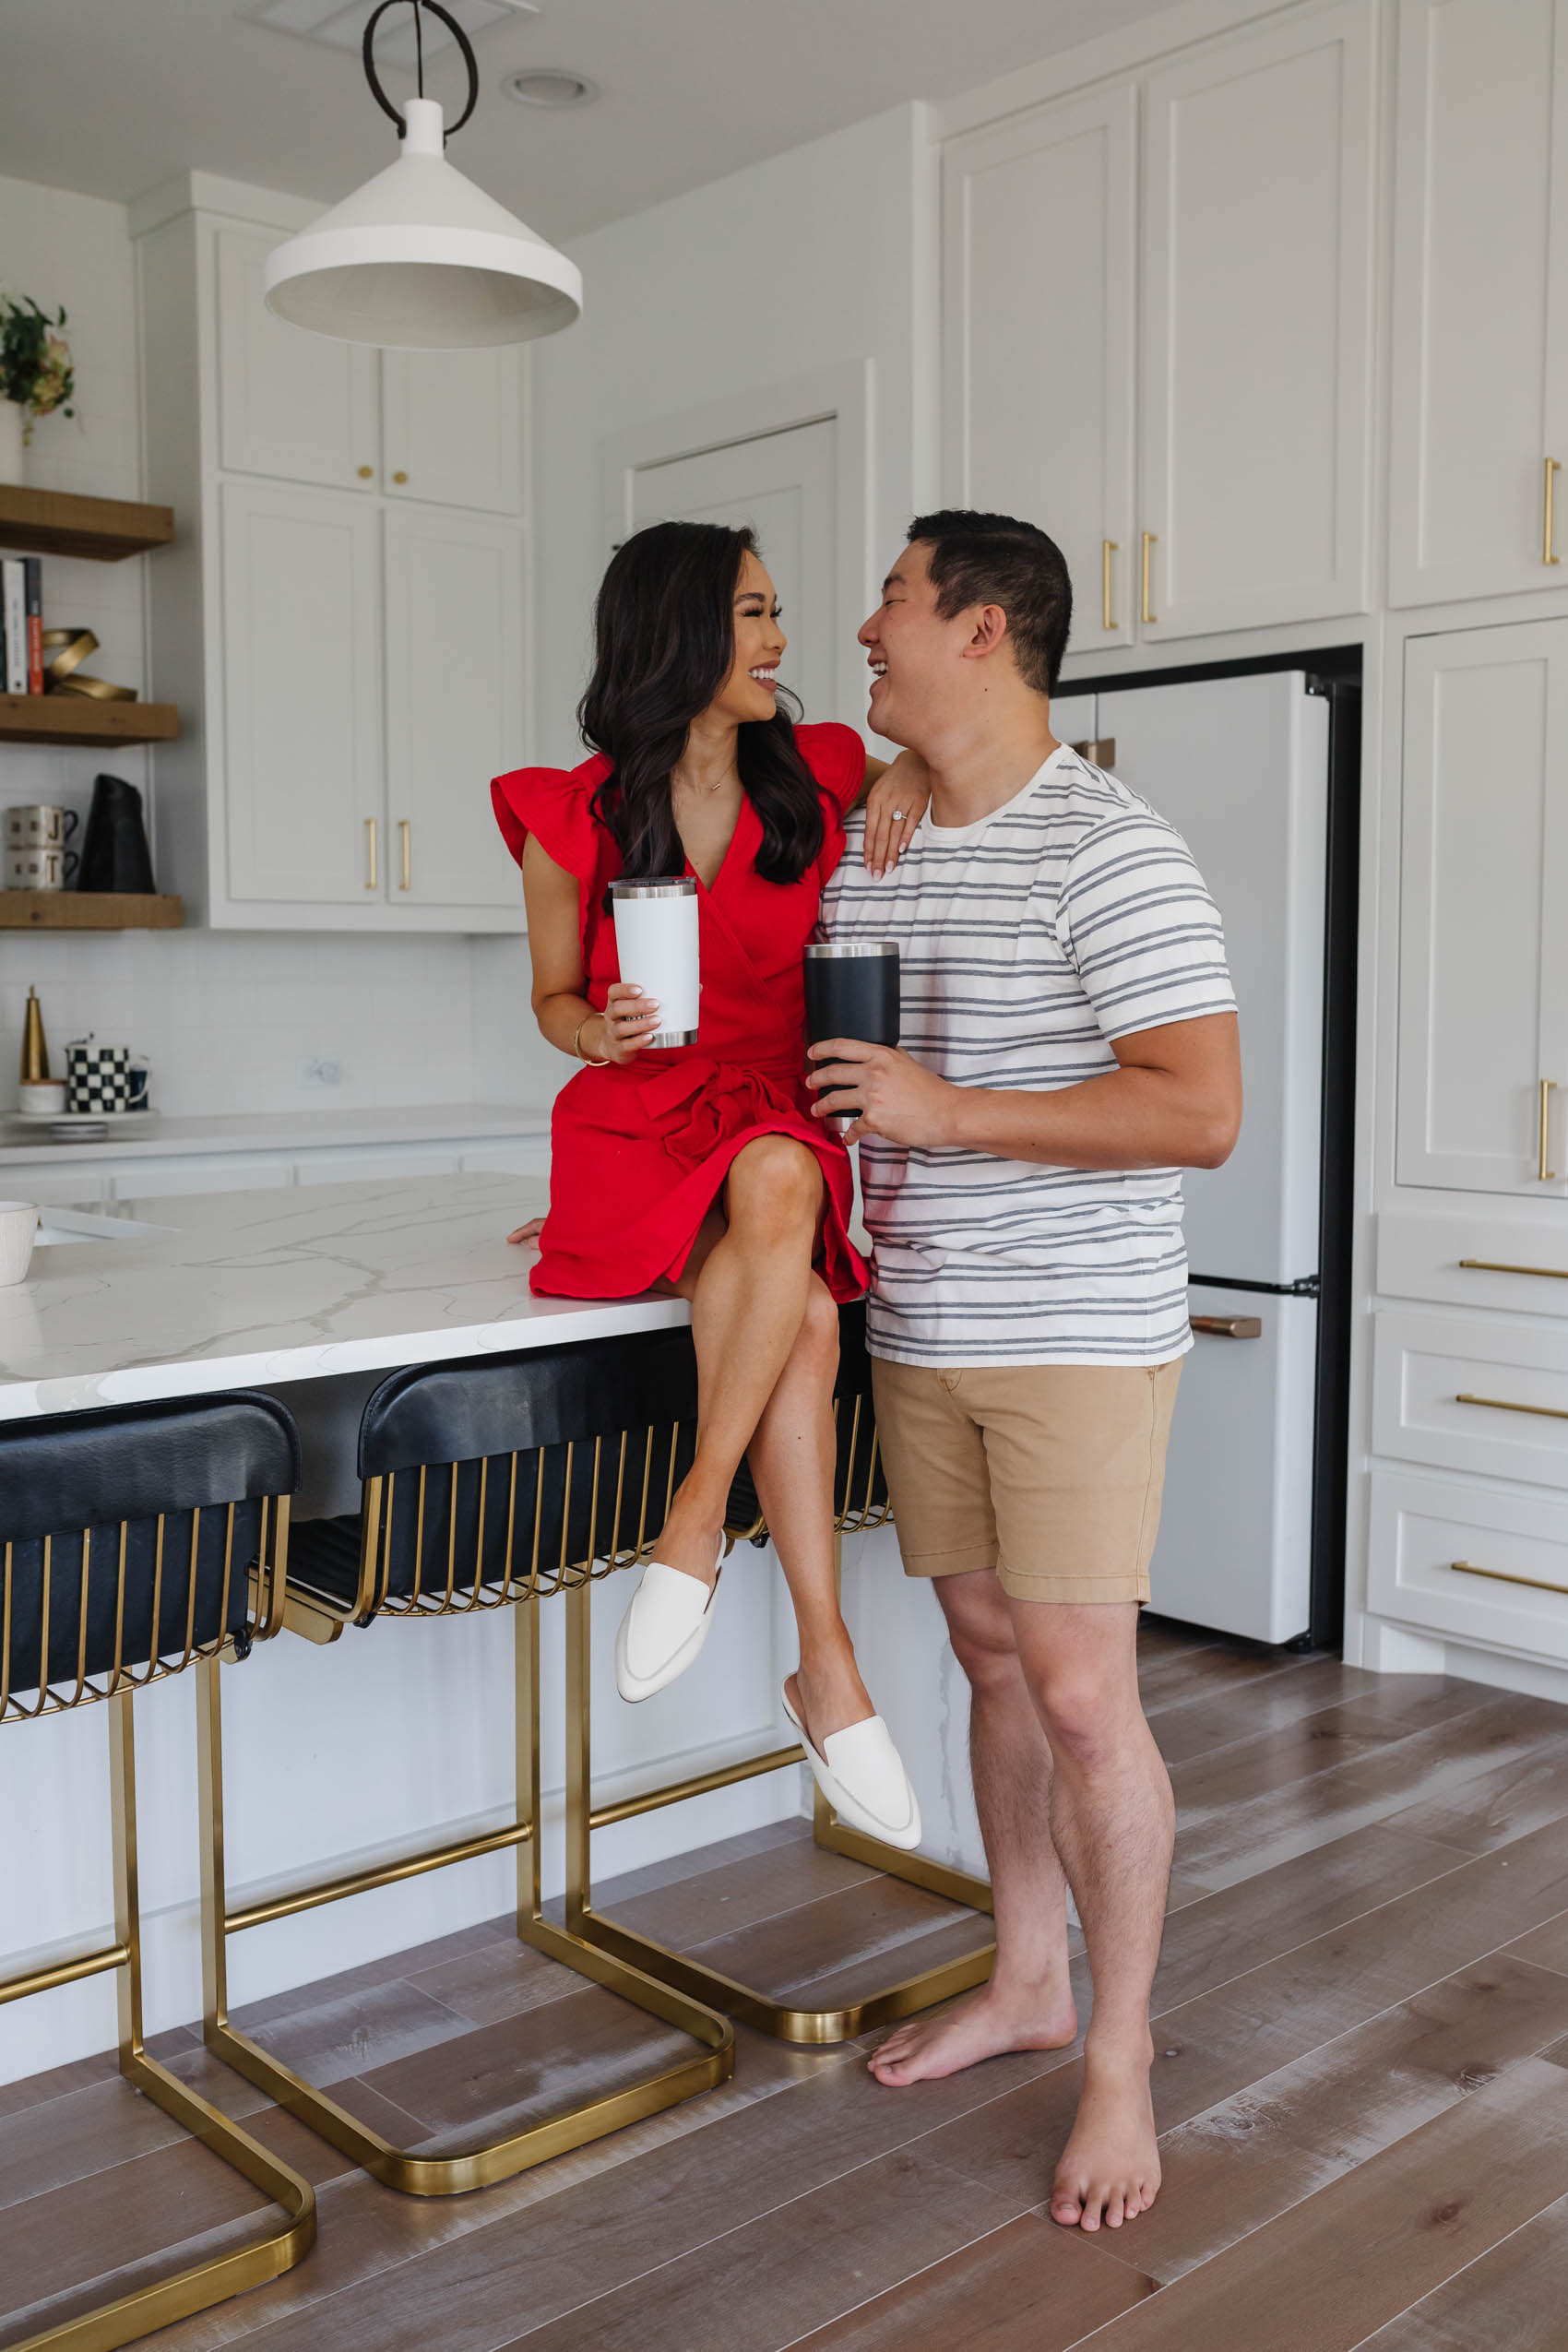 Blogger Hoang-Kim and her fiance Johnny wearing Madewell in their white kitchen of their transitional style house.